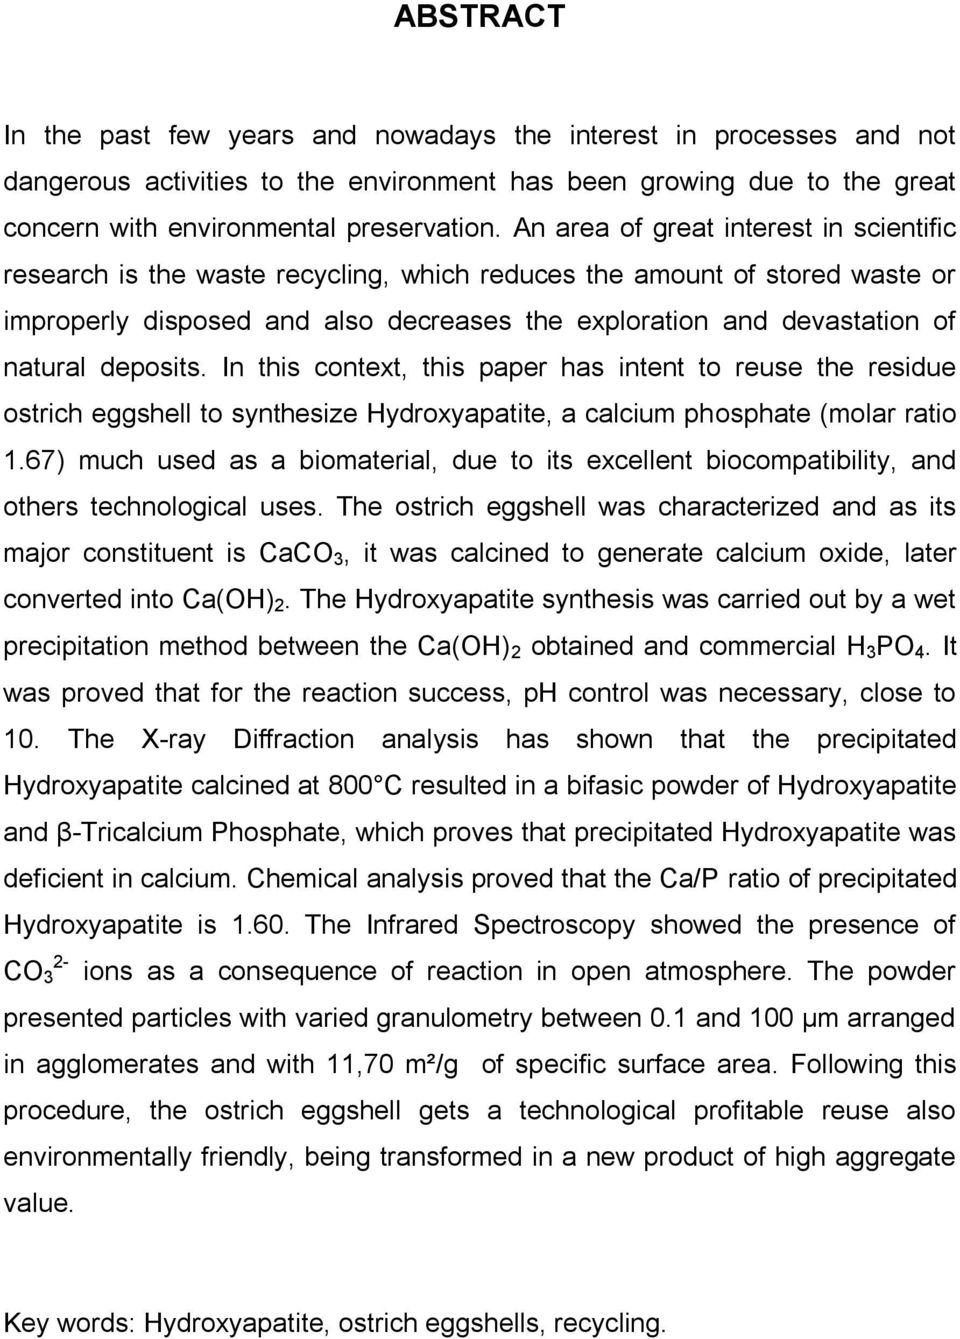 deposits. In this context, this paper has intent to reuse the residue ostrich eggshell to synthesize Hydroxyapatite, a calcium phosphate (molar ratio 1.